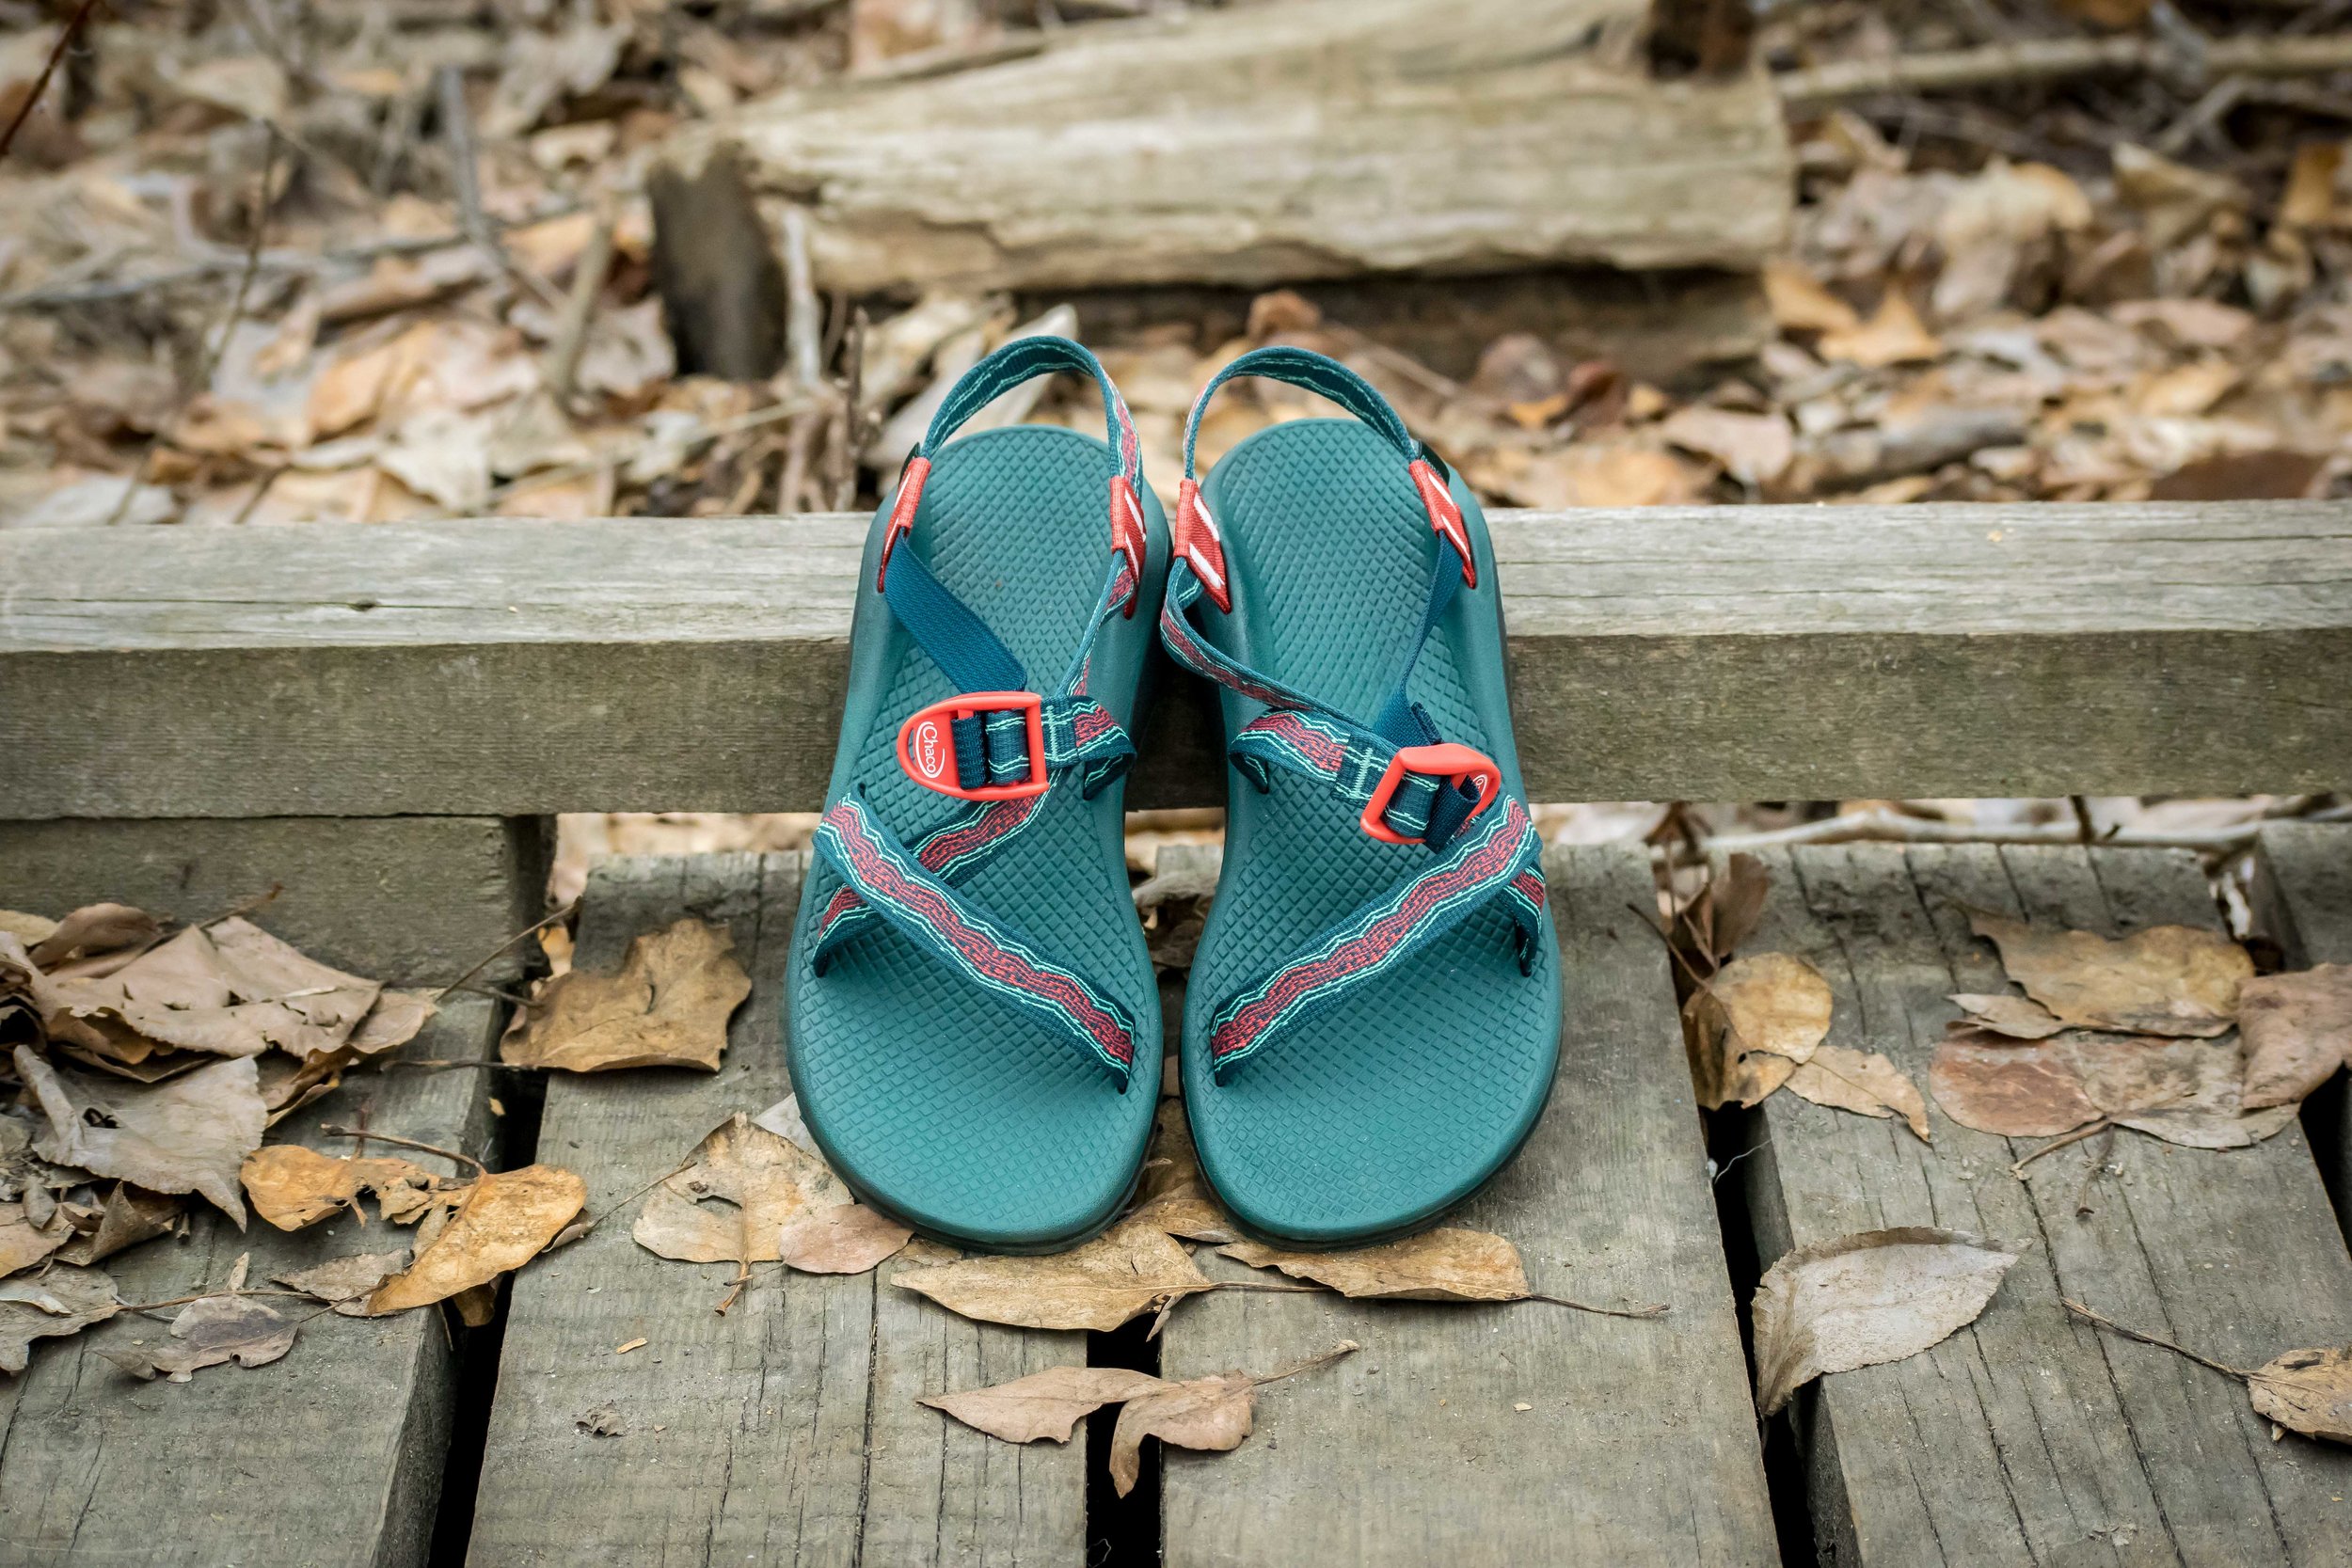 Finding the Right Travel Sandals